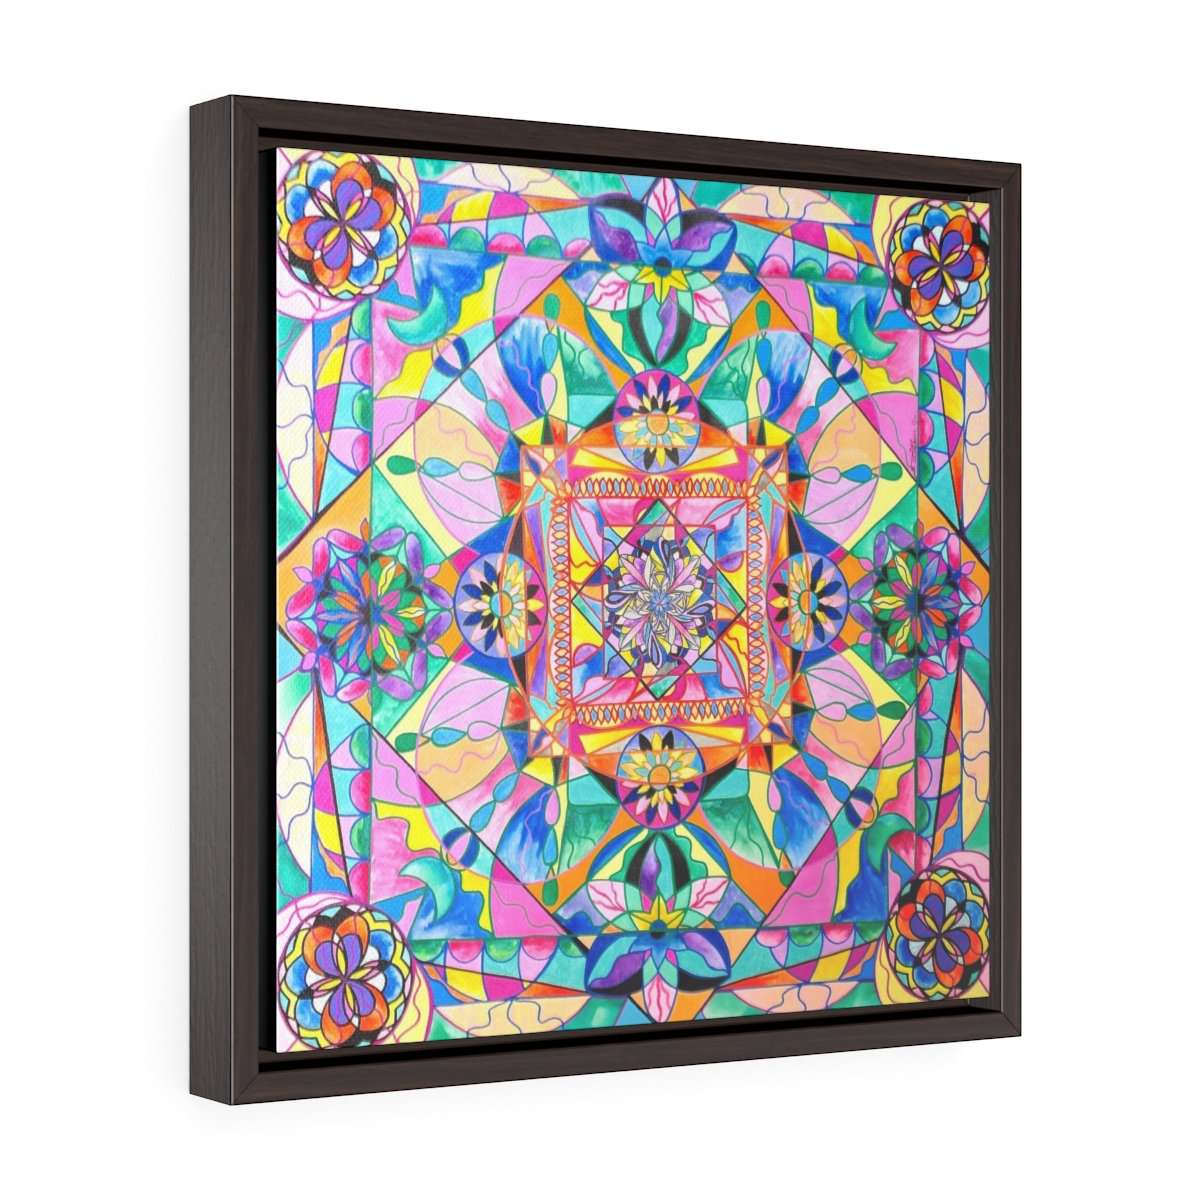 Renewal - Square Framed Premium Gallery Wrap Canvas